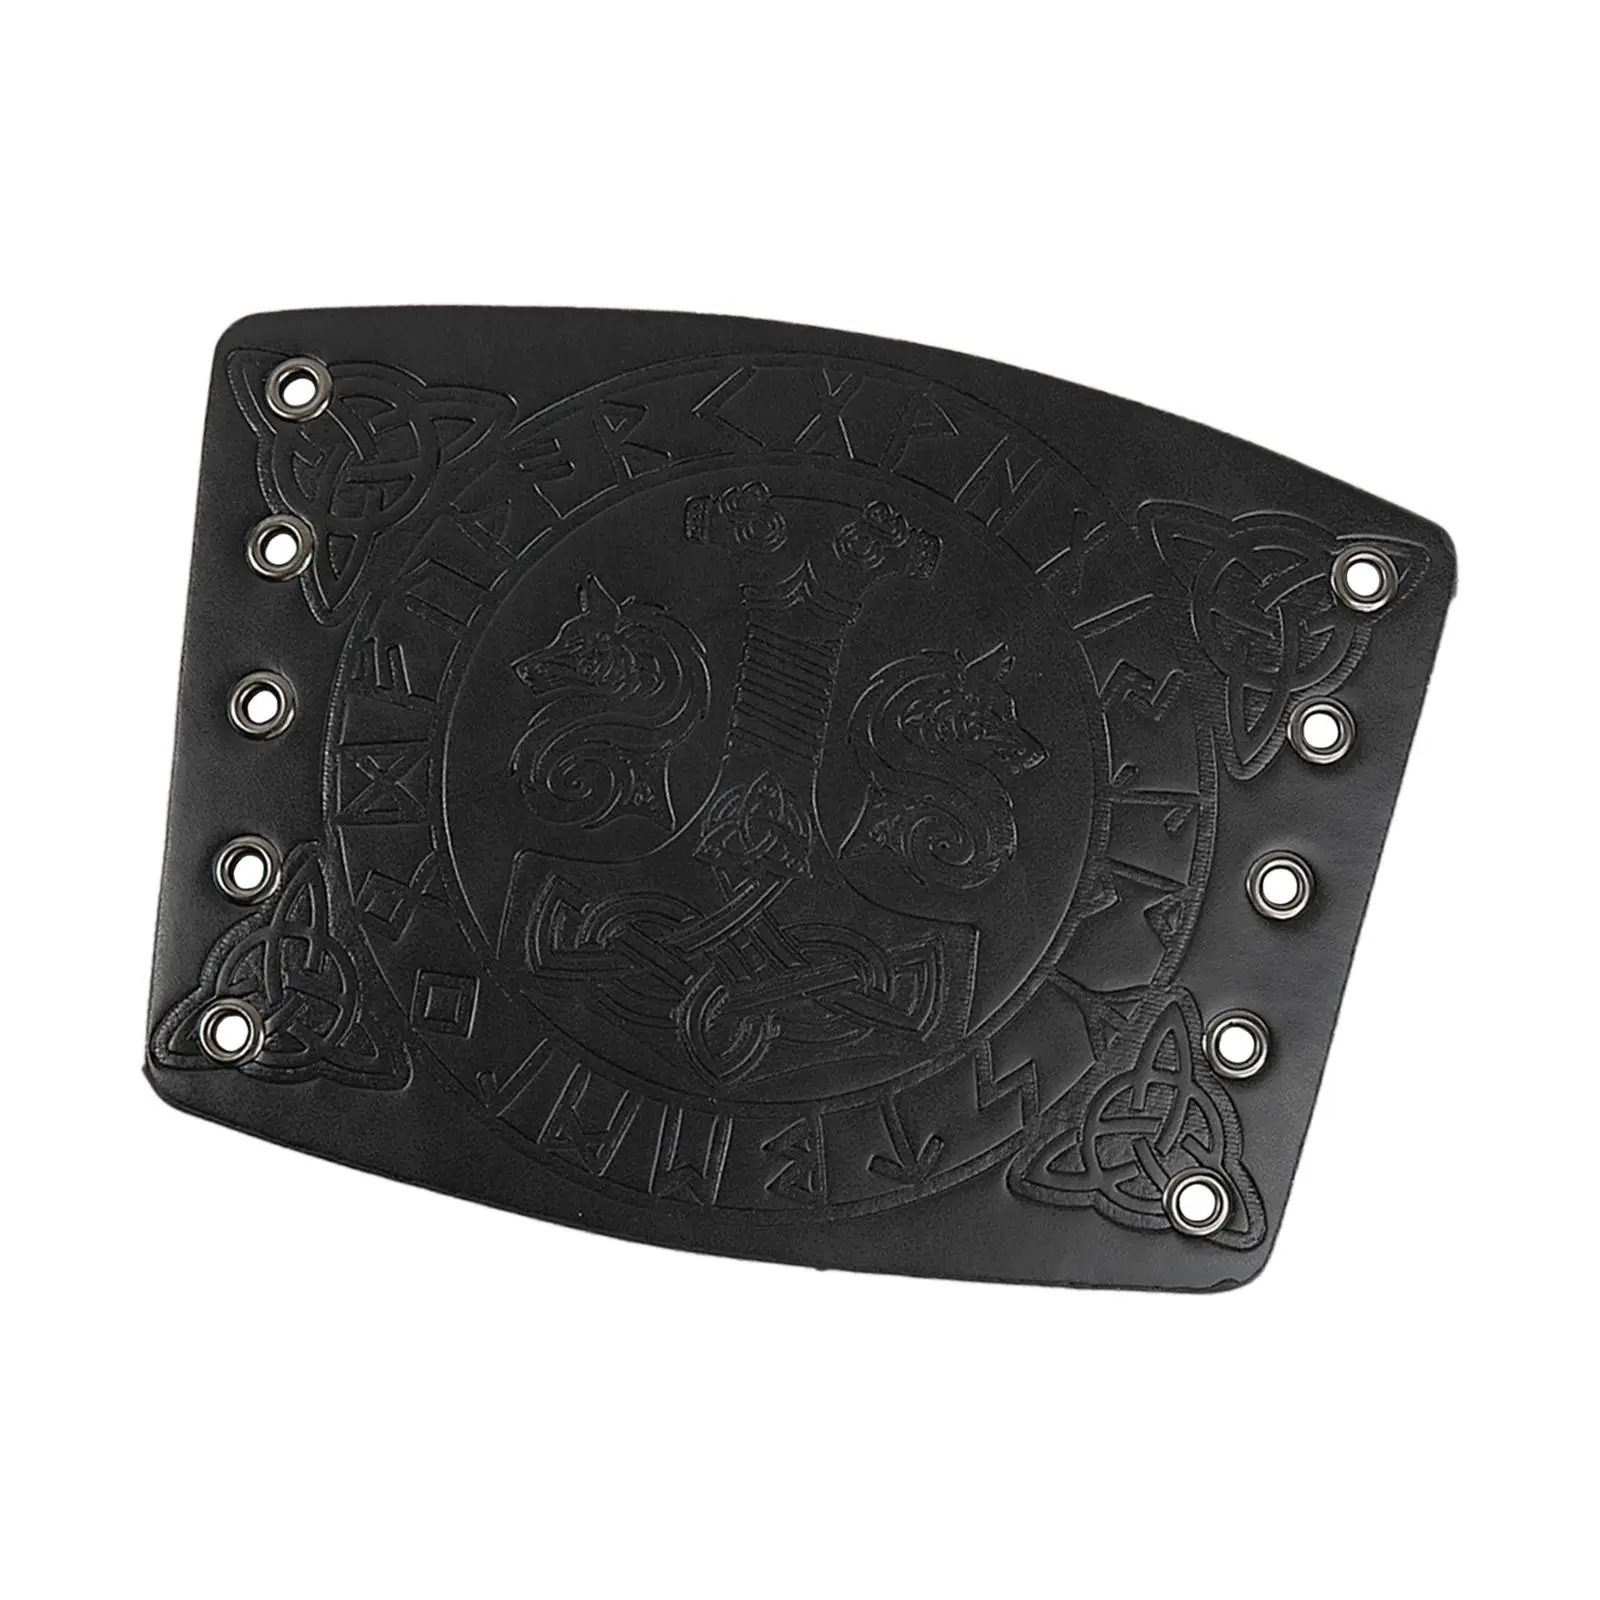 Bracers Cuff Bracelet for Horsing Riding Themed Party Stage Show